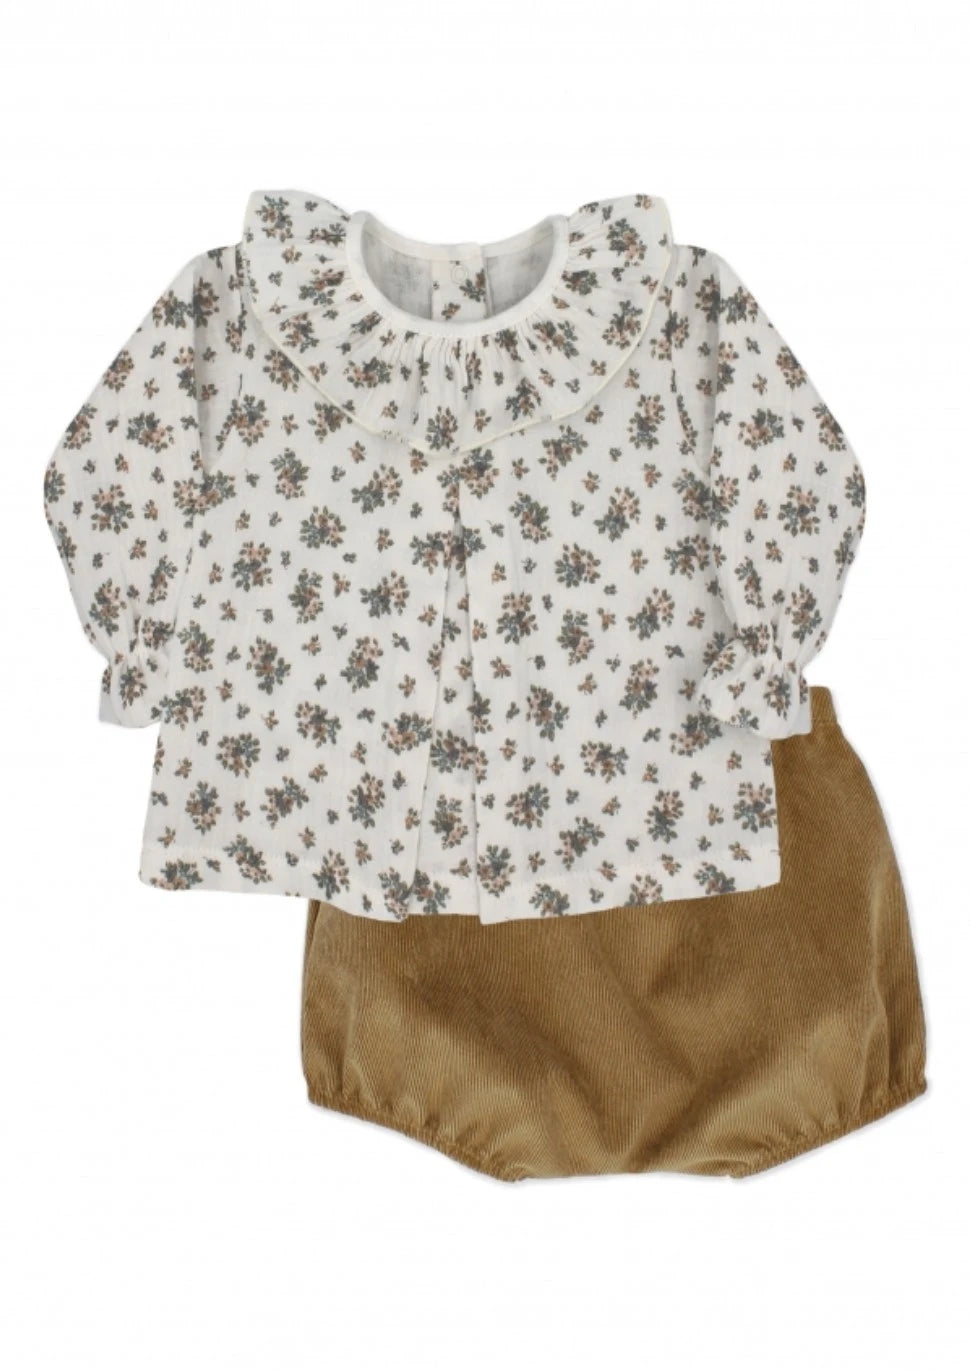 ditsy floral print blouse and bloomers set 